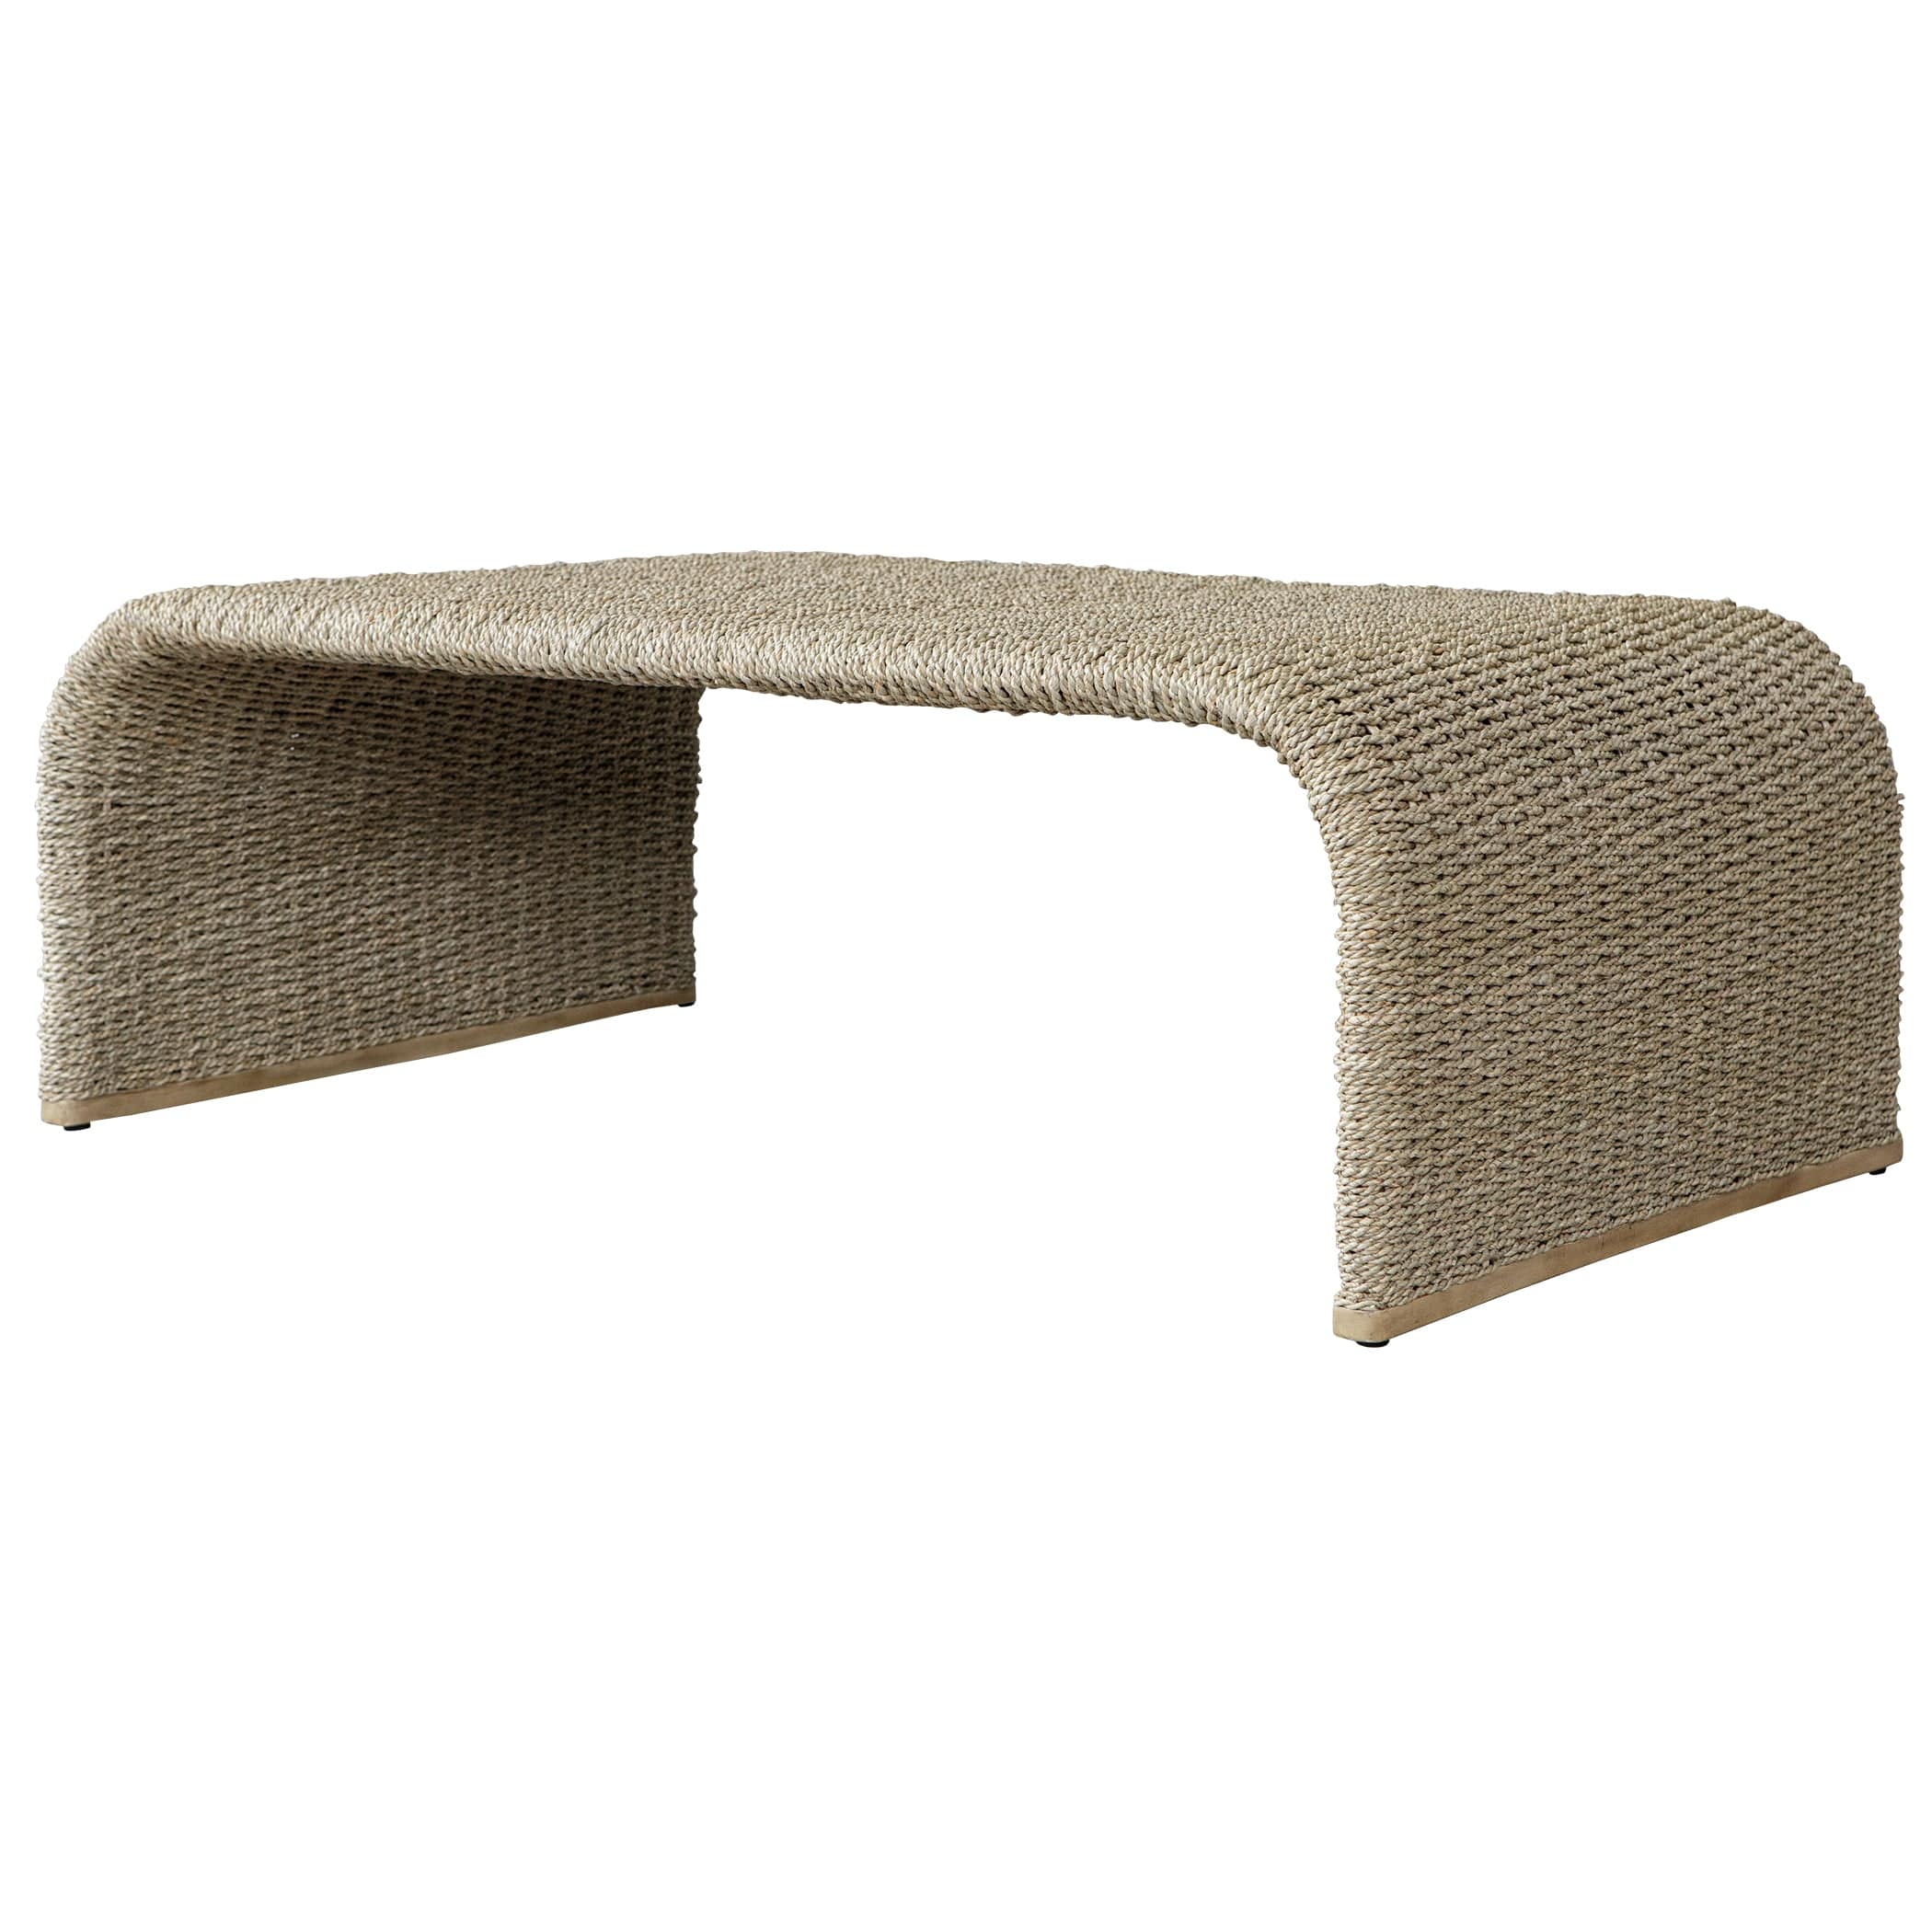 Calabria Woven Seagrass Coffee Table Uttermost